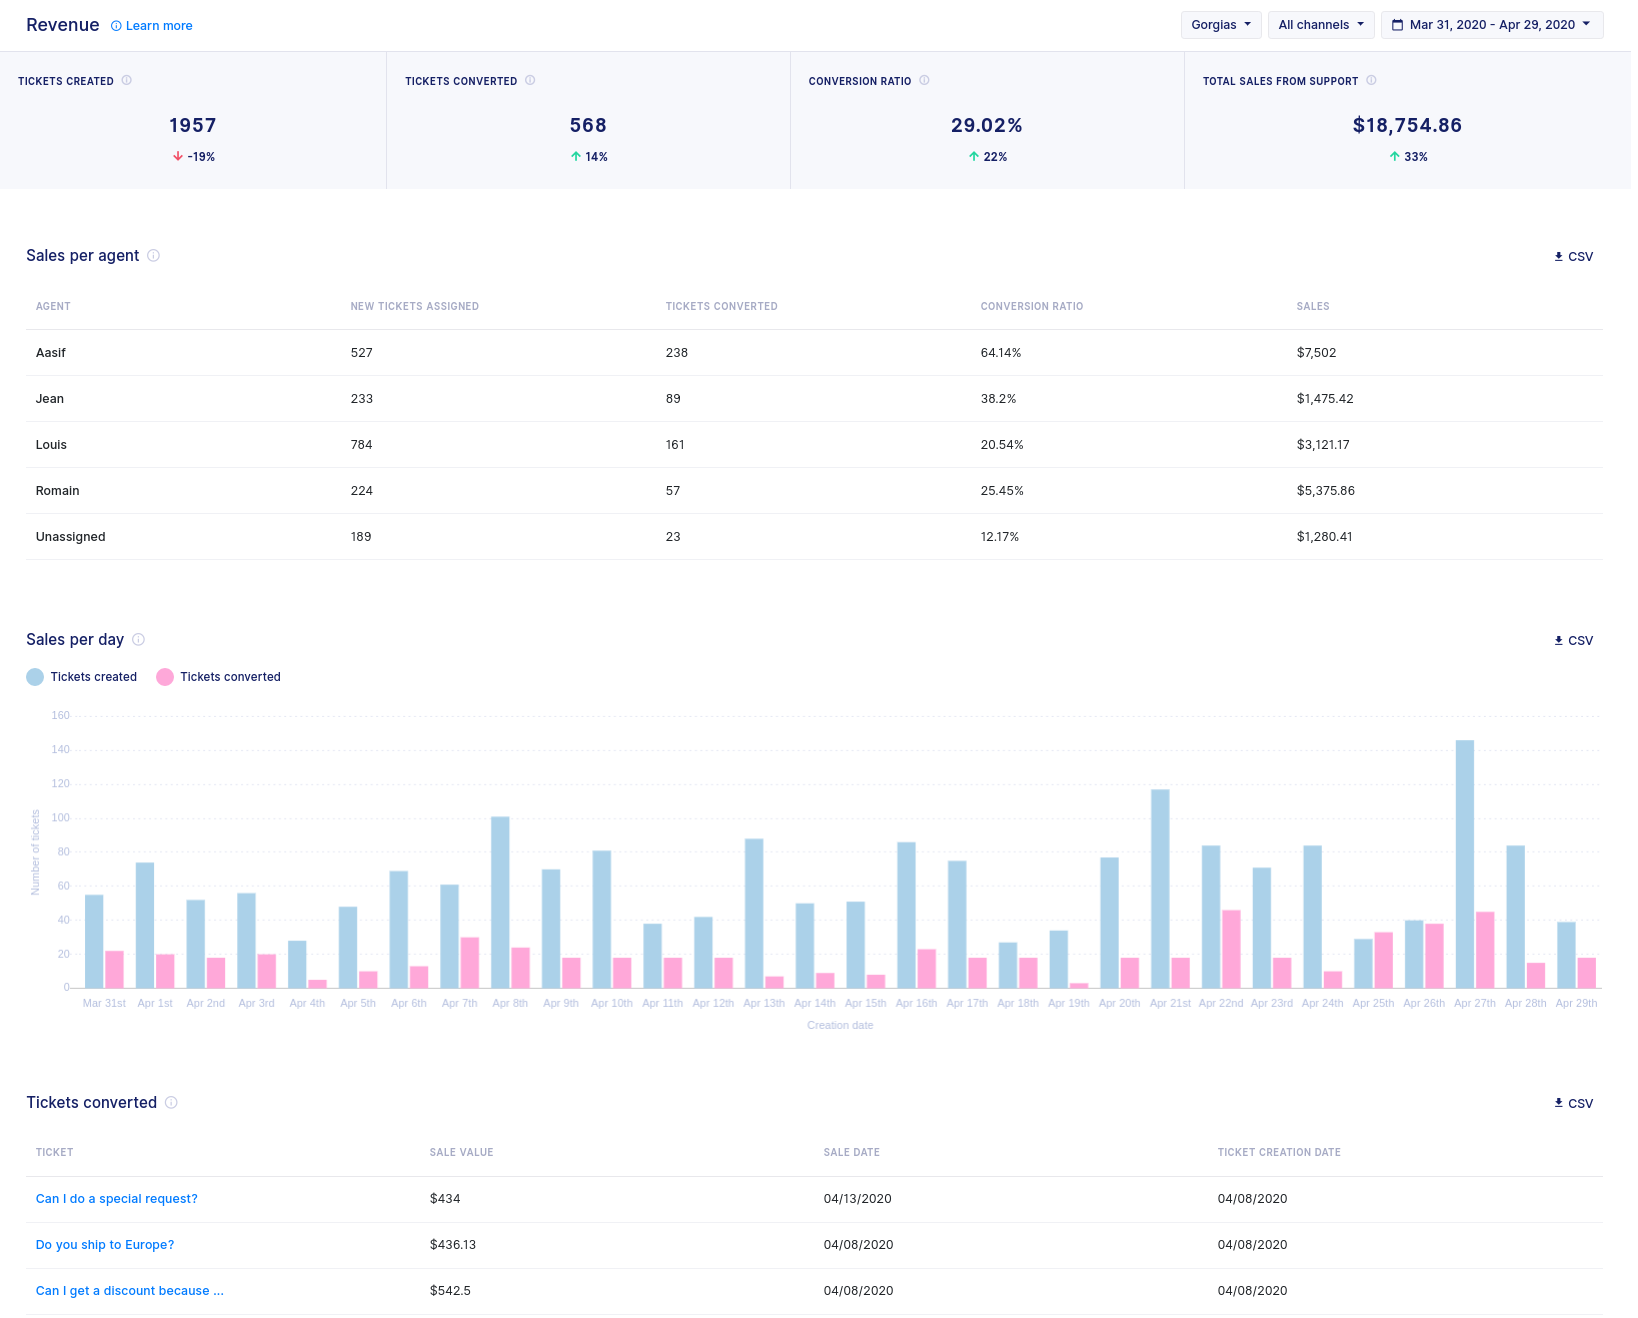 Revenue statistics is coming out of beta